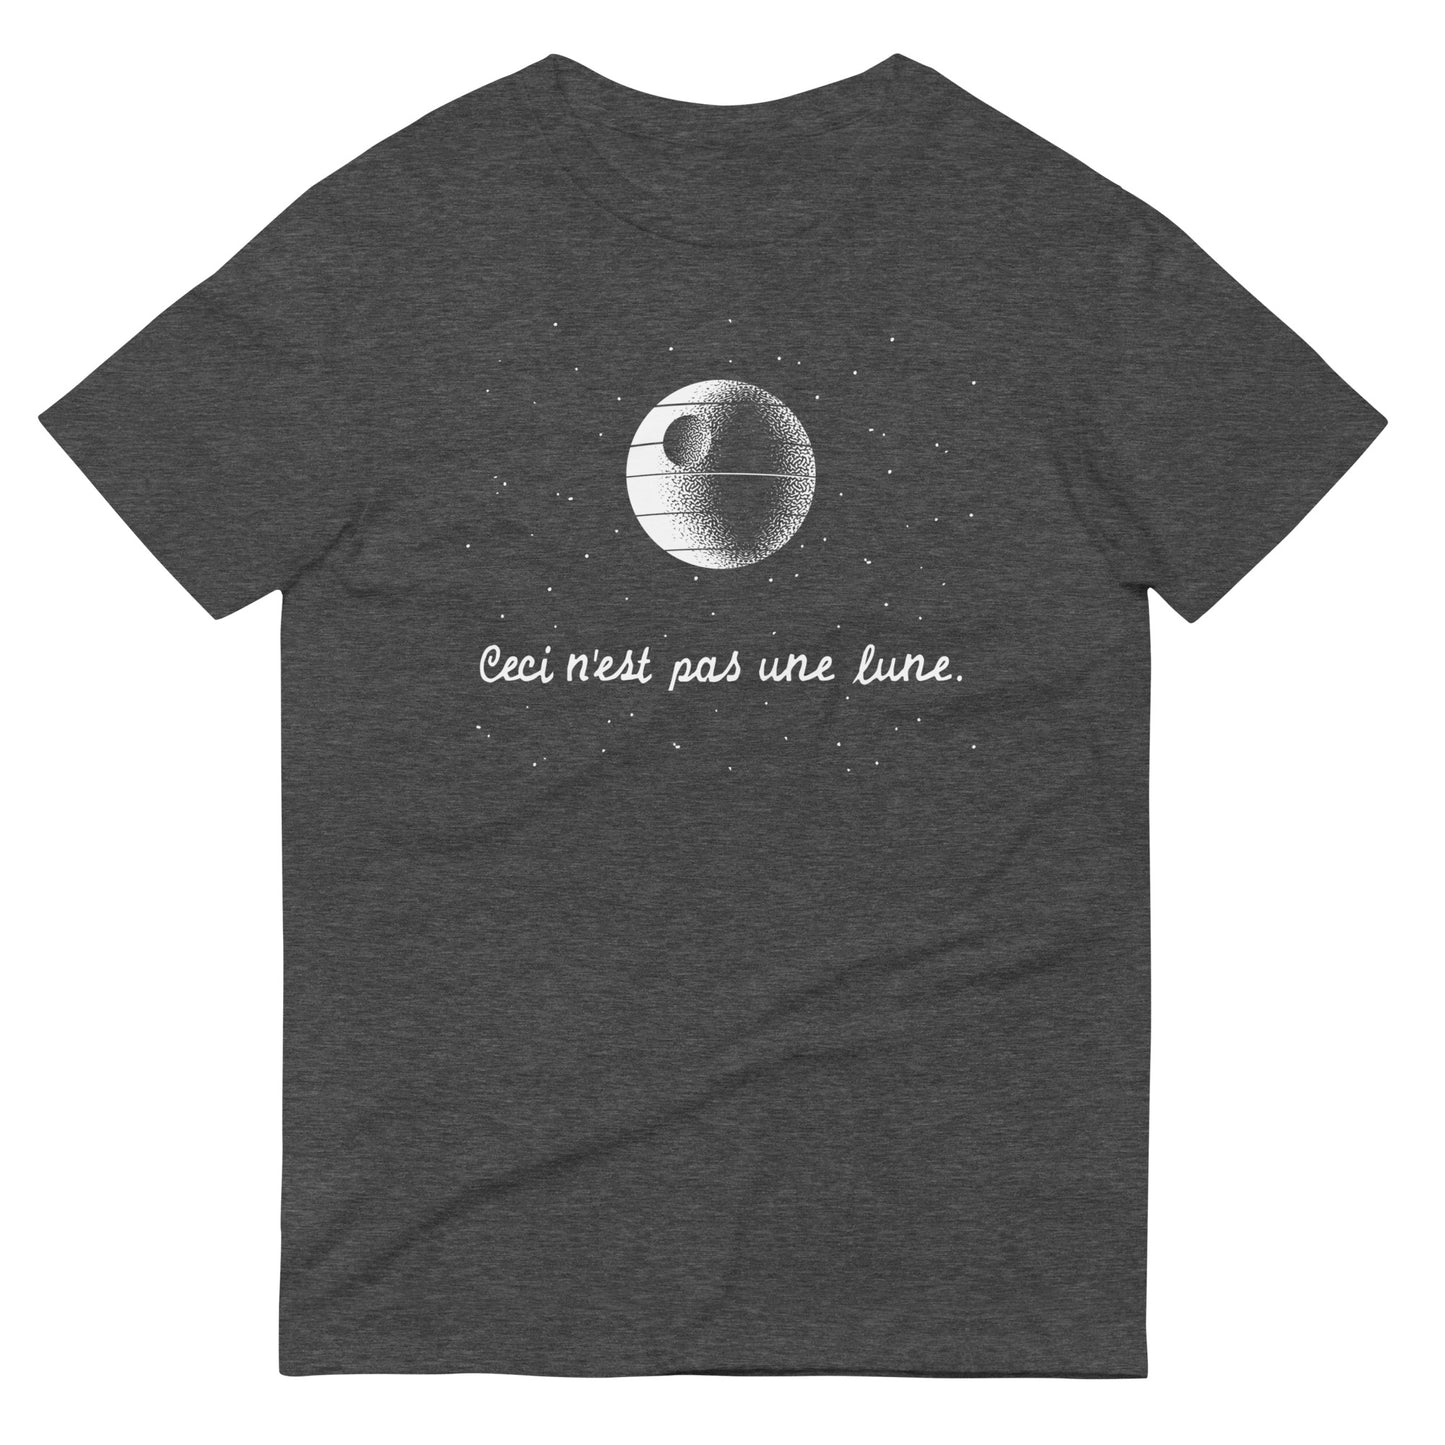 This Is Not A Moon Men's Signature Tee